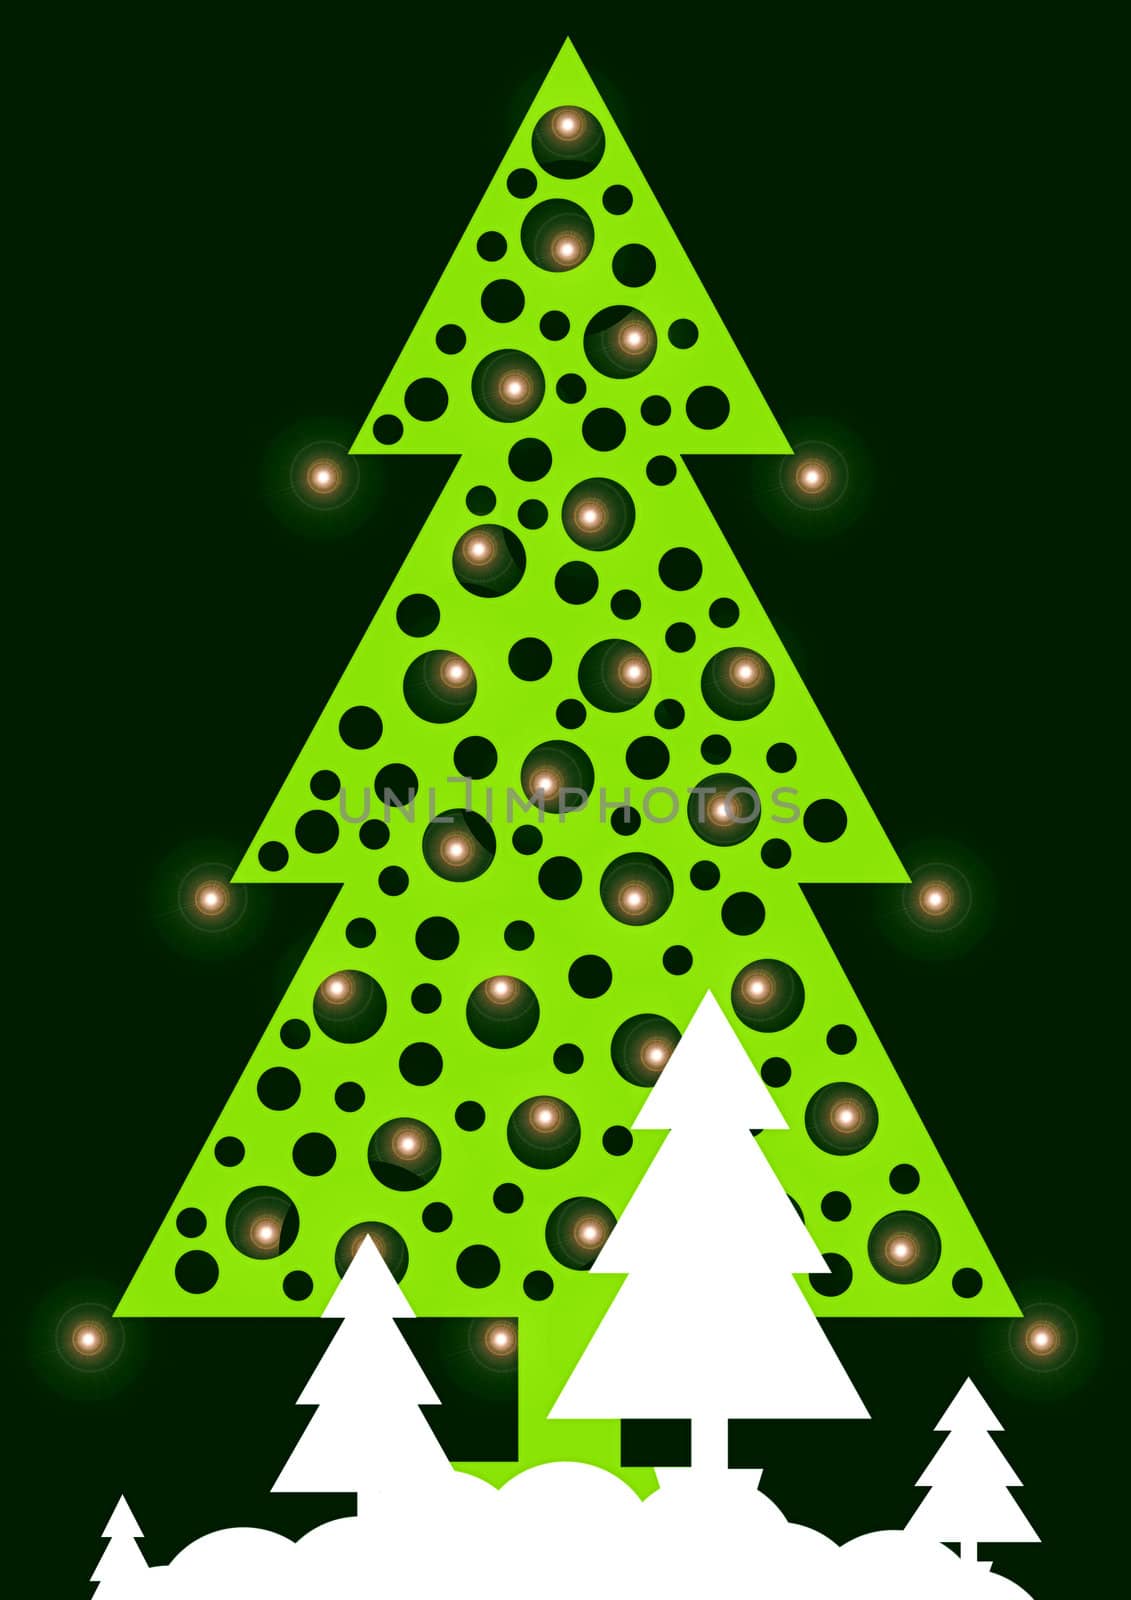 abstract image of a creative Christmas green beauty